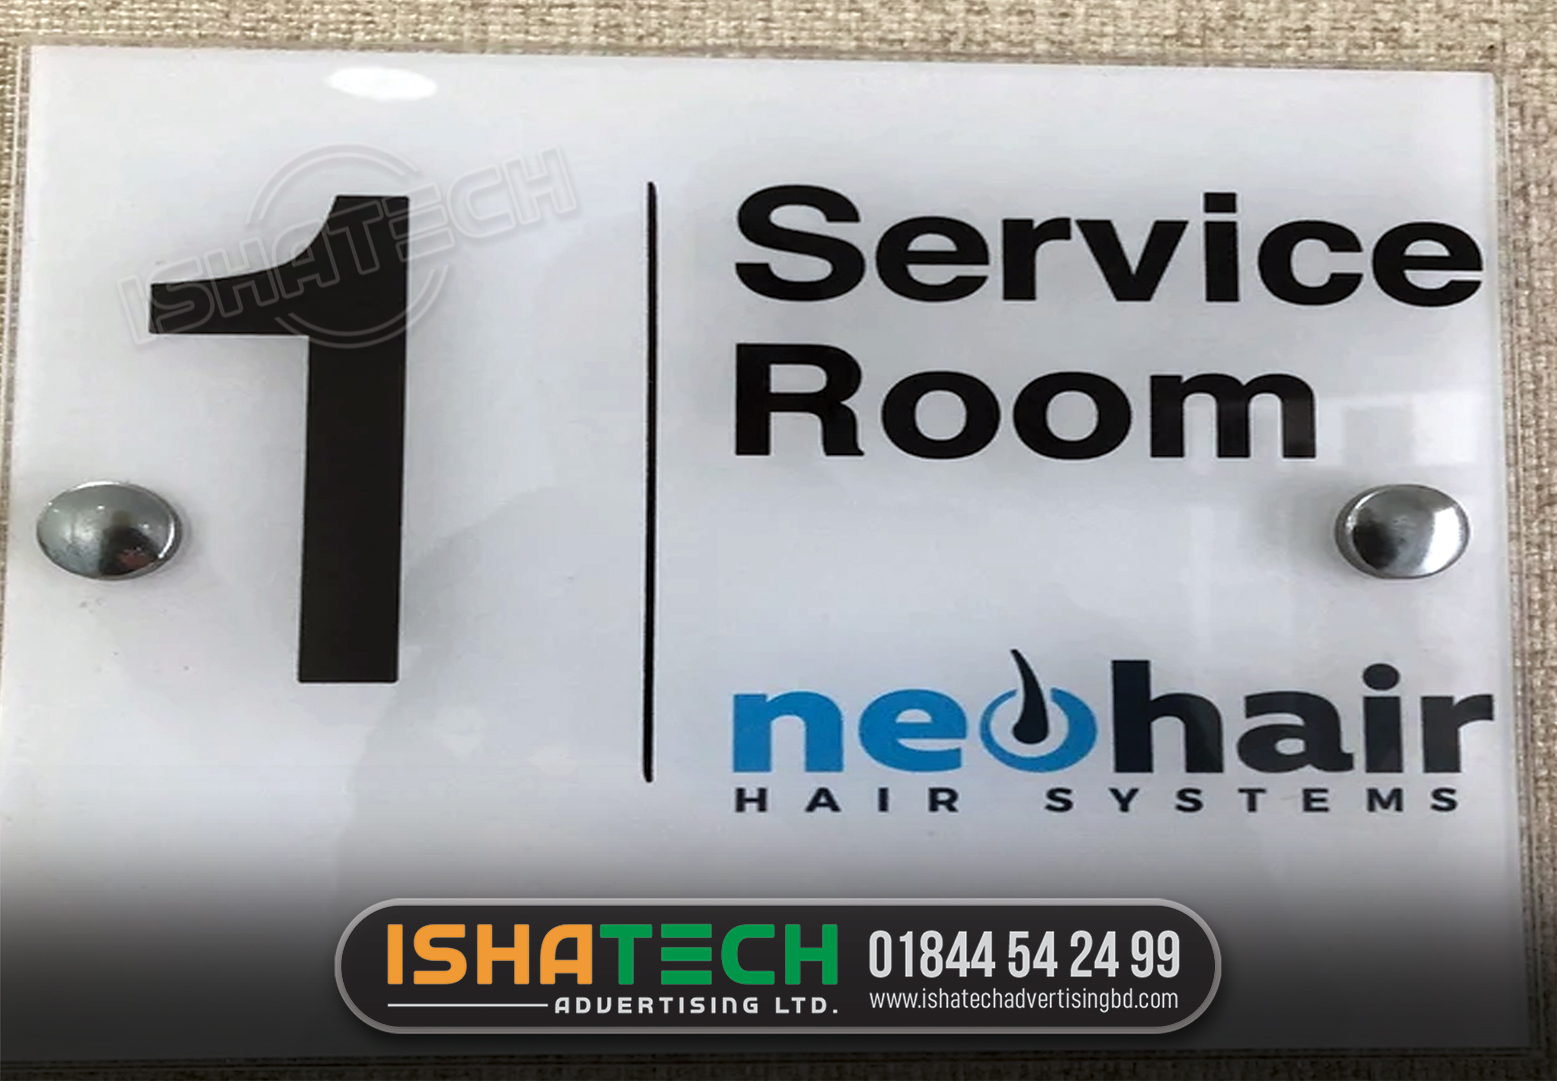 SERVICE ROOM NEOHAIR NAME PLATE, GLASS NAME PLATE, Name plates for home, Glass design, Wall design, Name Plate Signs Slide Over Glass Cubicle Walls